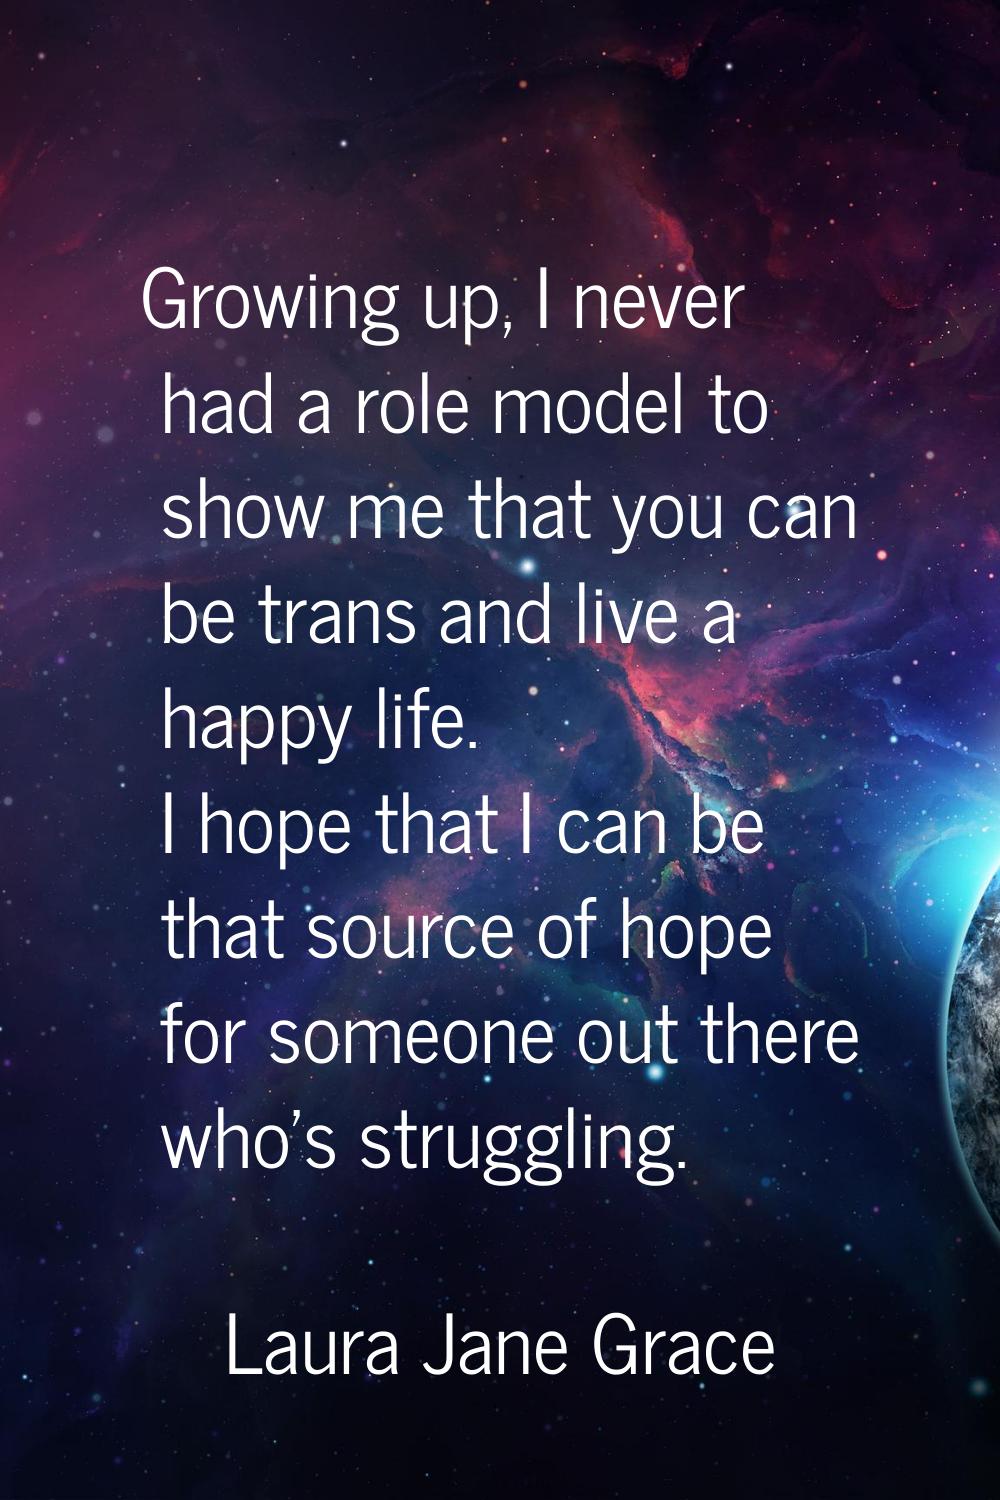 Growing up, I never had a role model to show me that you can be trans and live a happy life. I hope